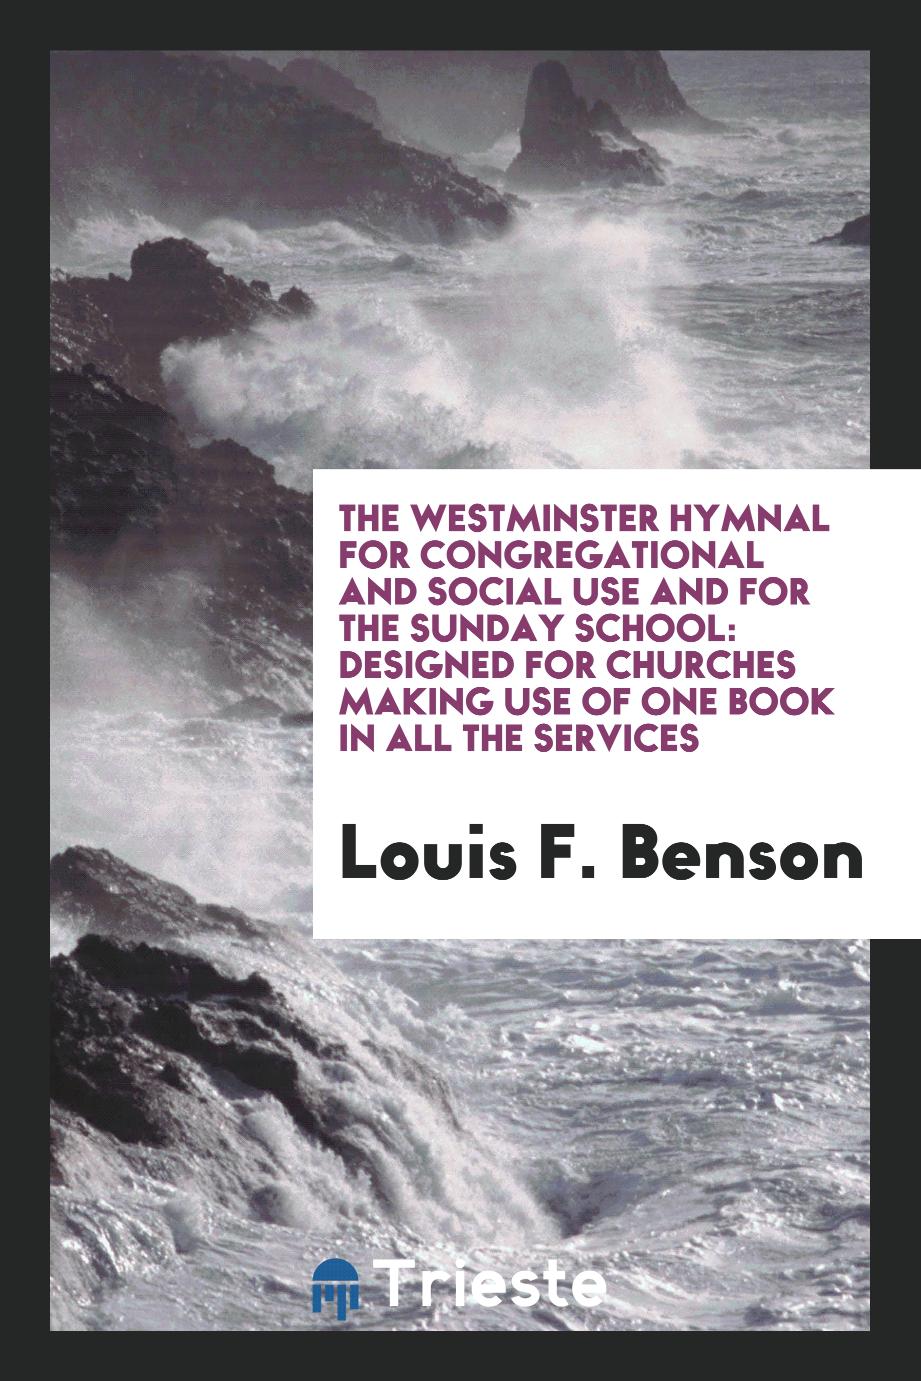 Louis F. Benson - The Westminster Hymnal for Congregational and Social Use and for the Sunday School: Designed for Churches Making Use of One Book in All the Services